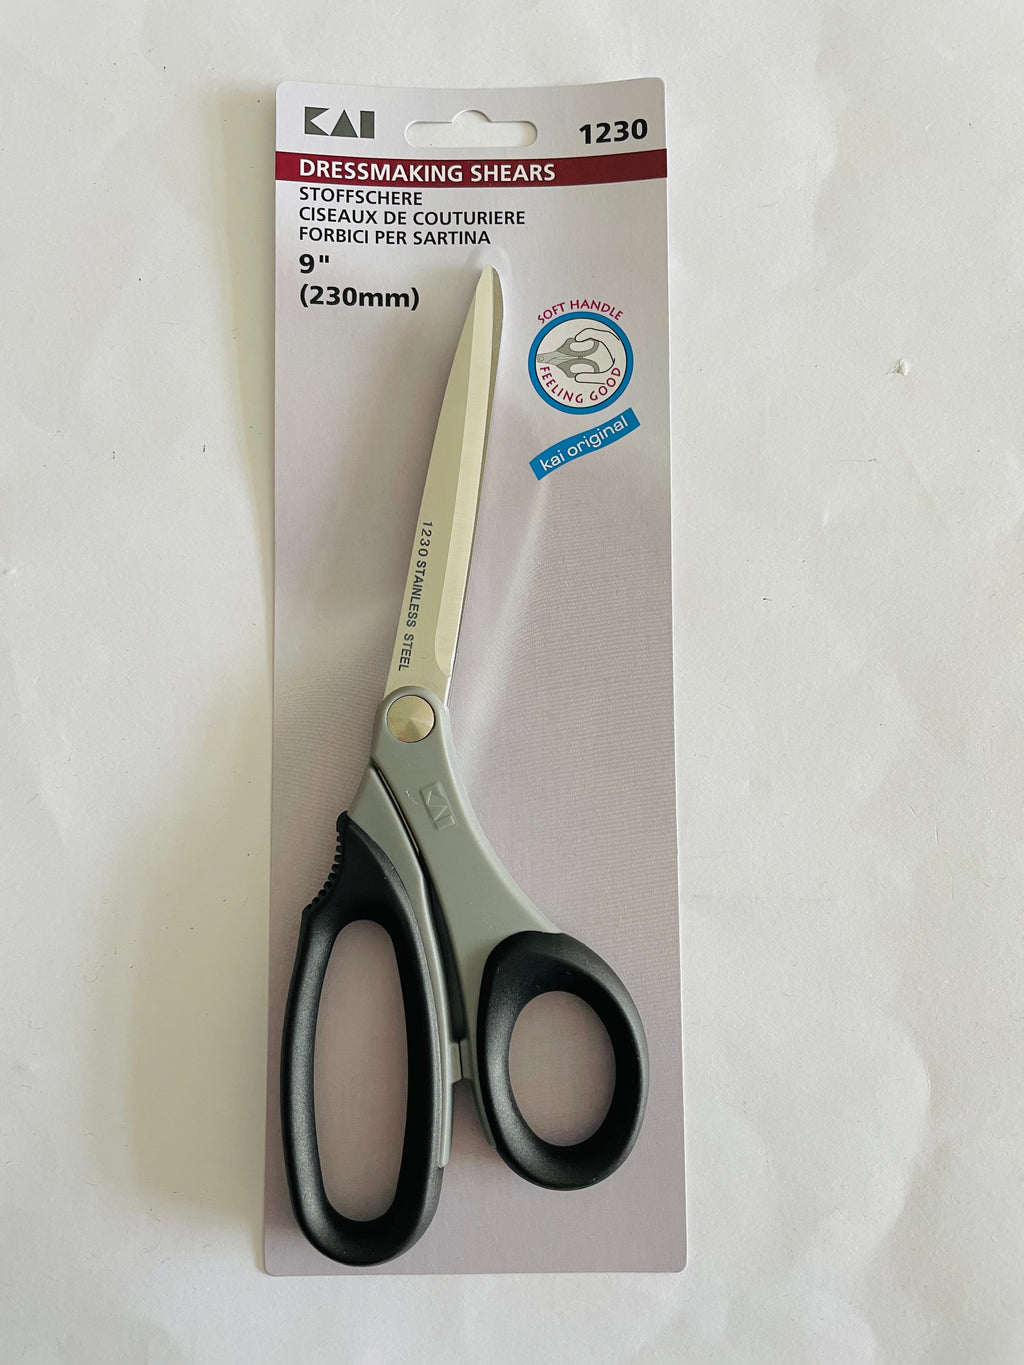  CANARY Japanese Sewing Scissors for Fabric Cutting